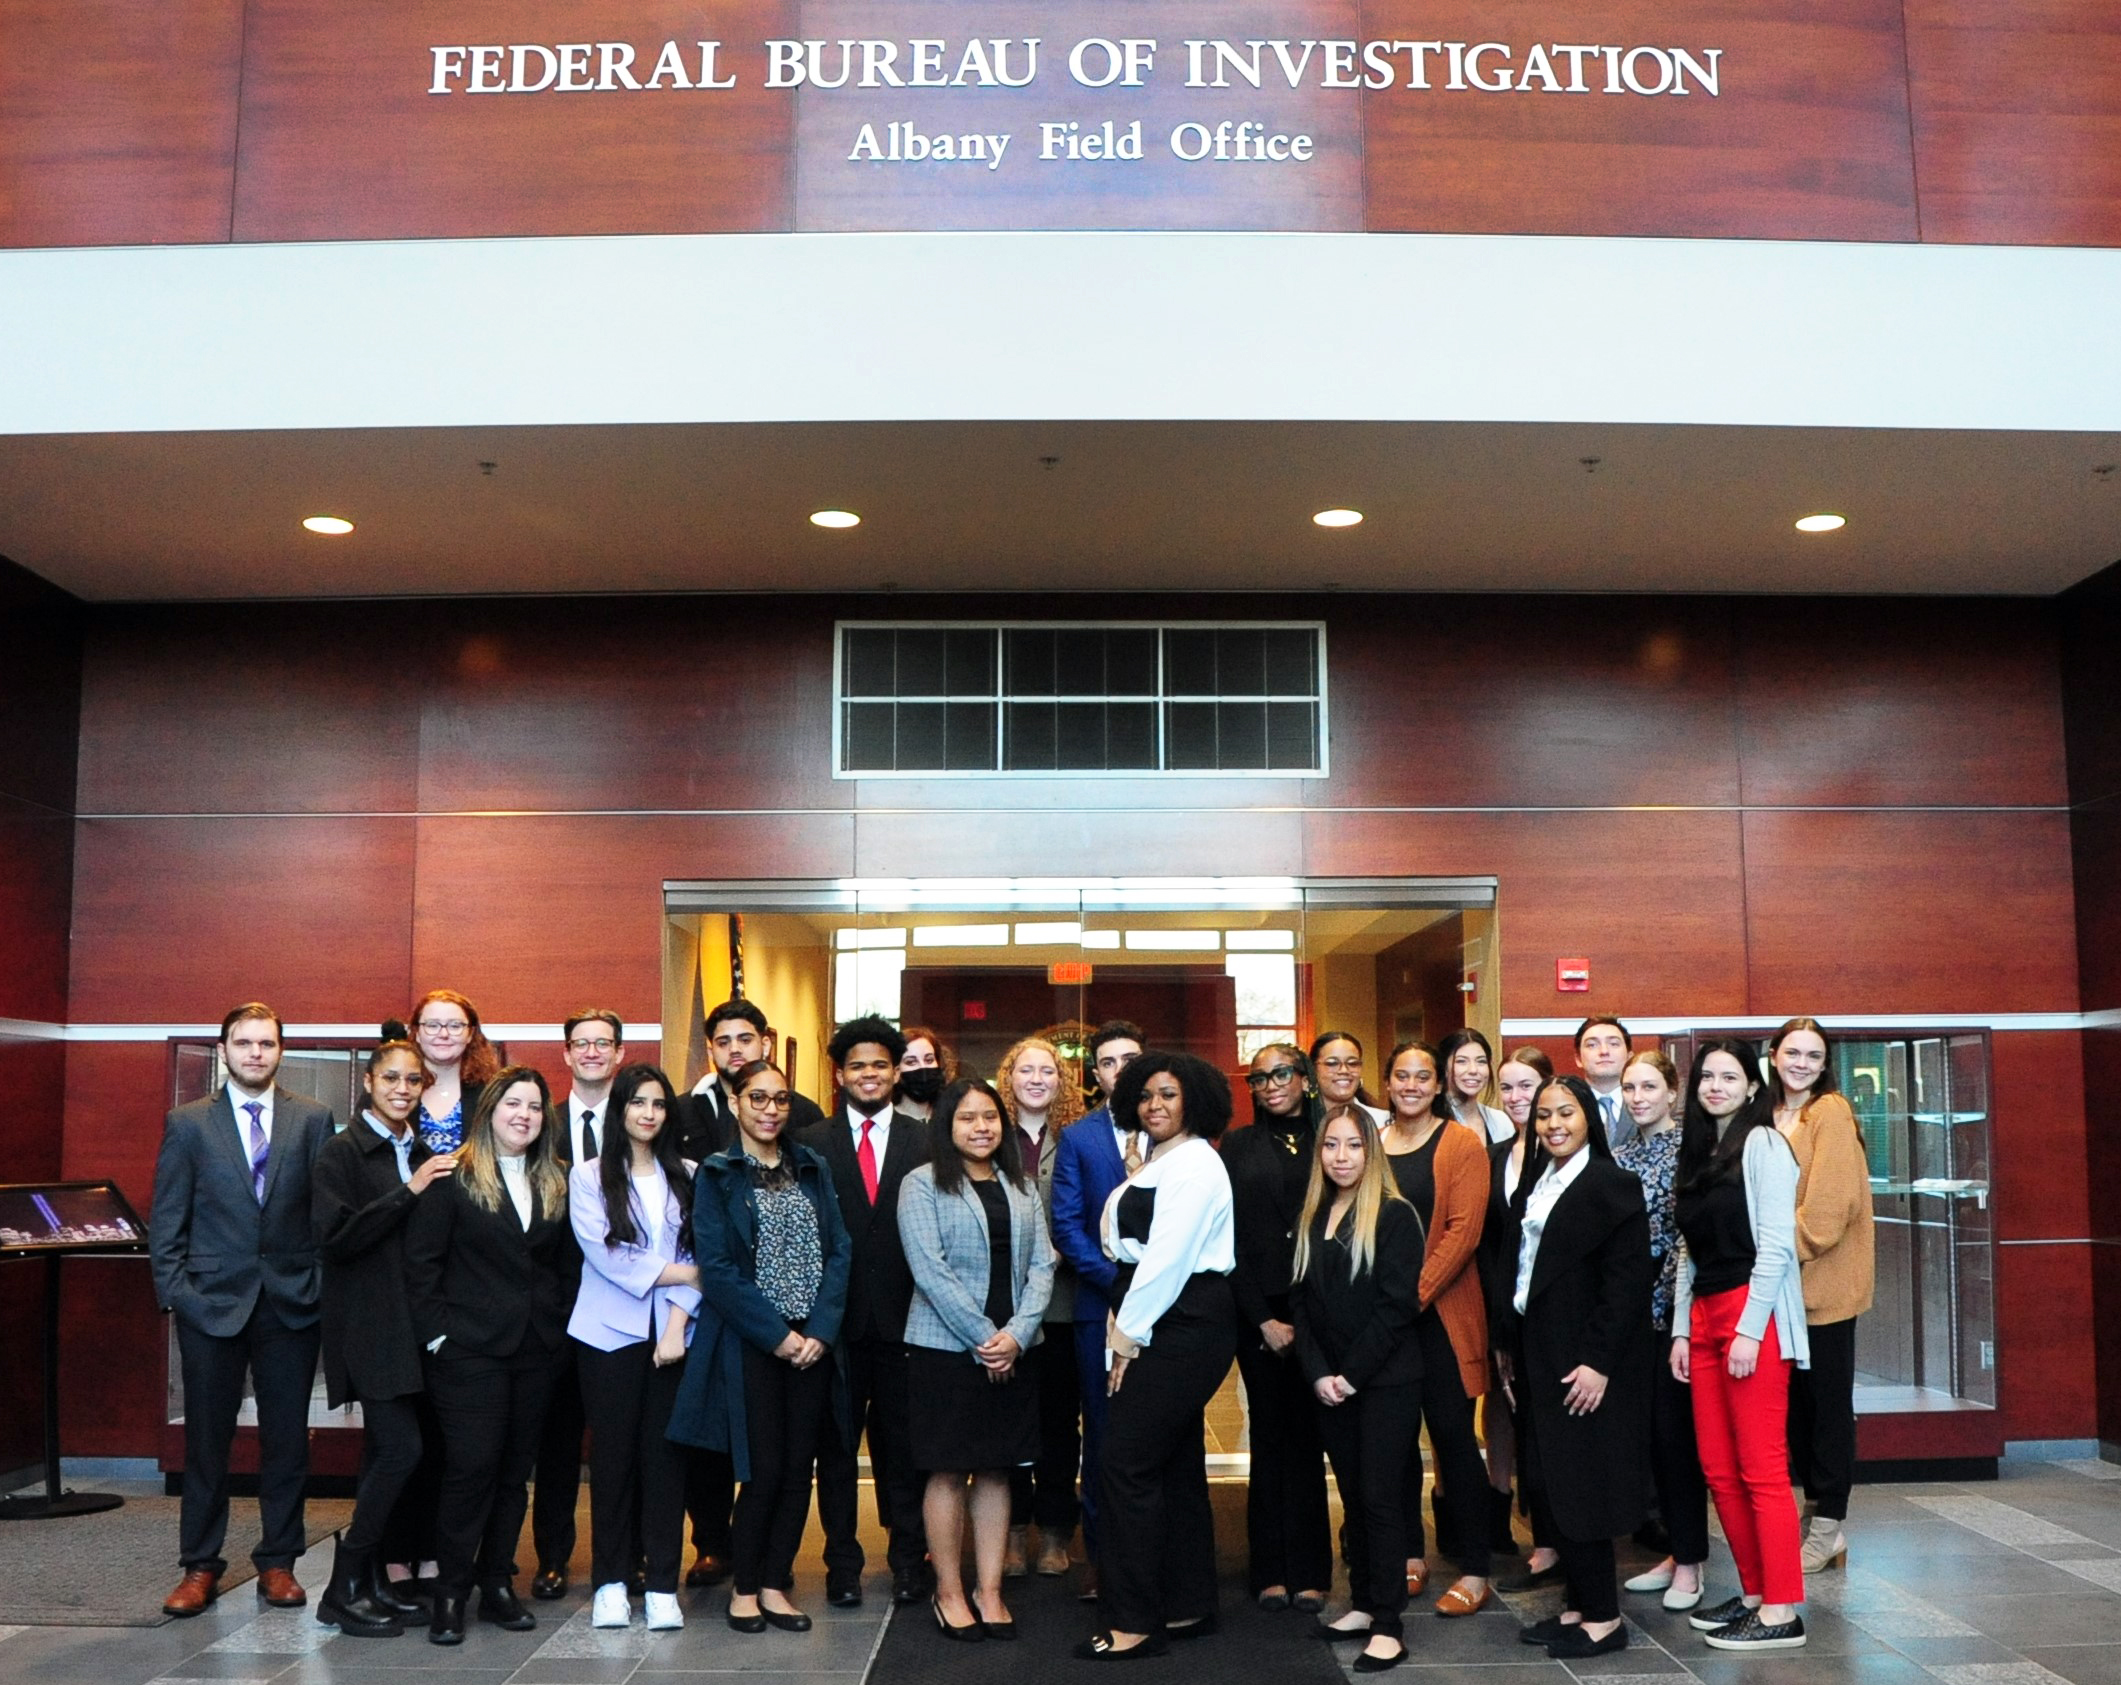 A large group of UAlbany students standing inside the Federal Bureau of Investigation Albany Field Office building.